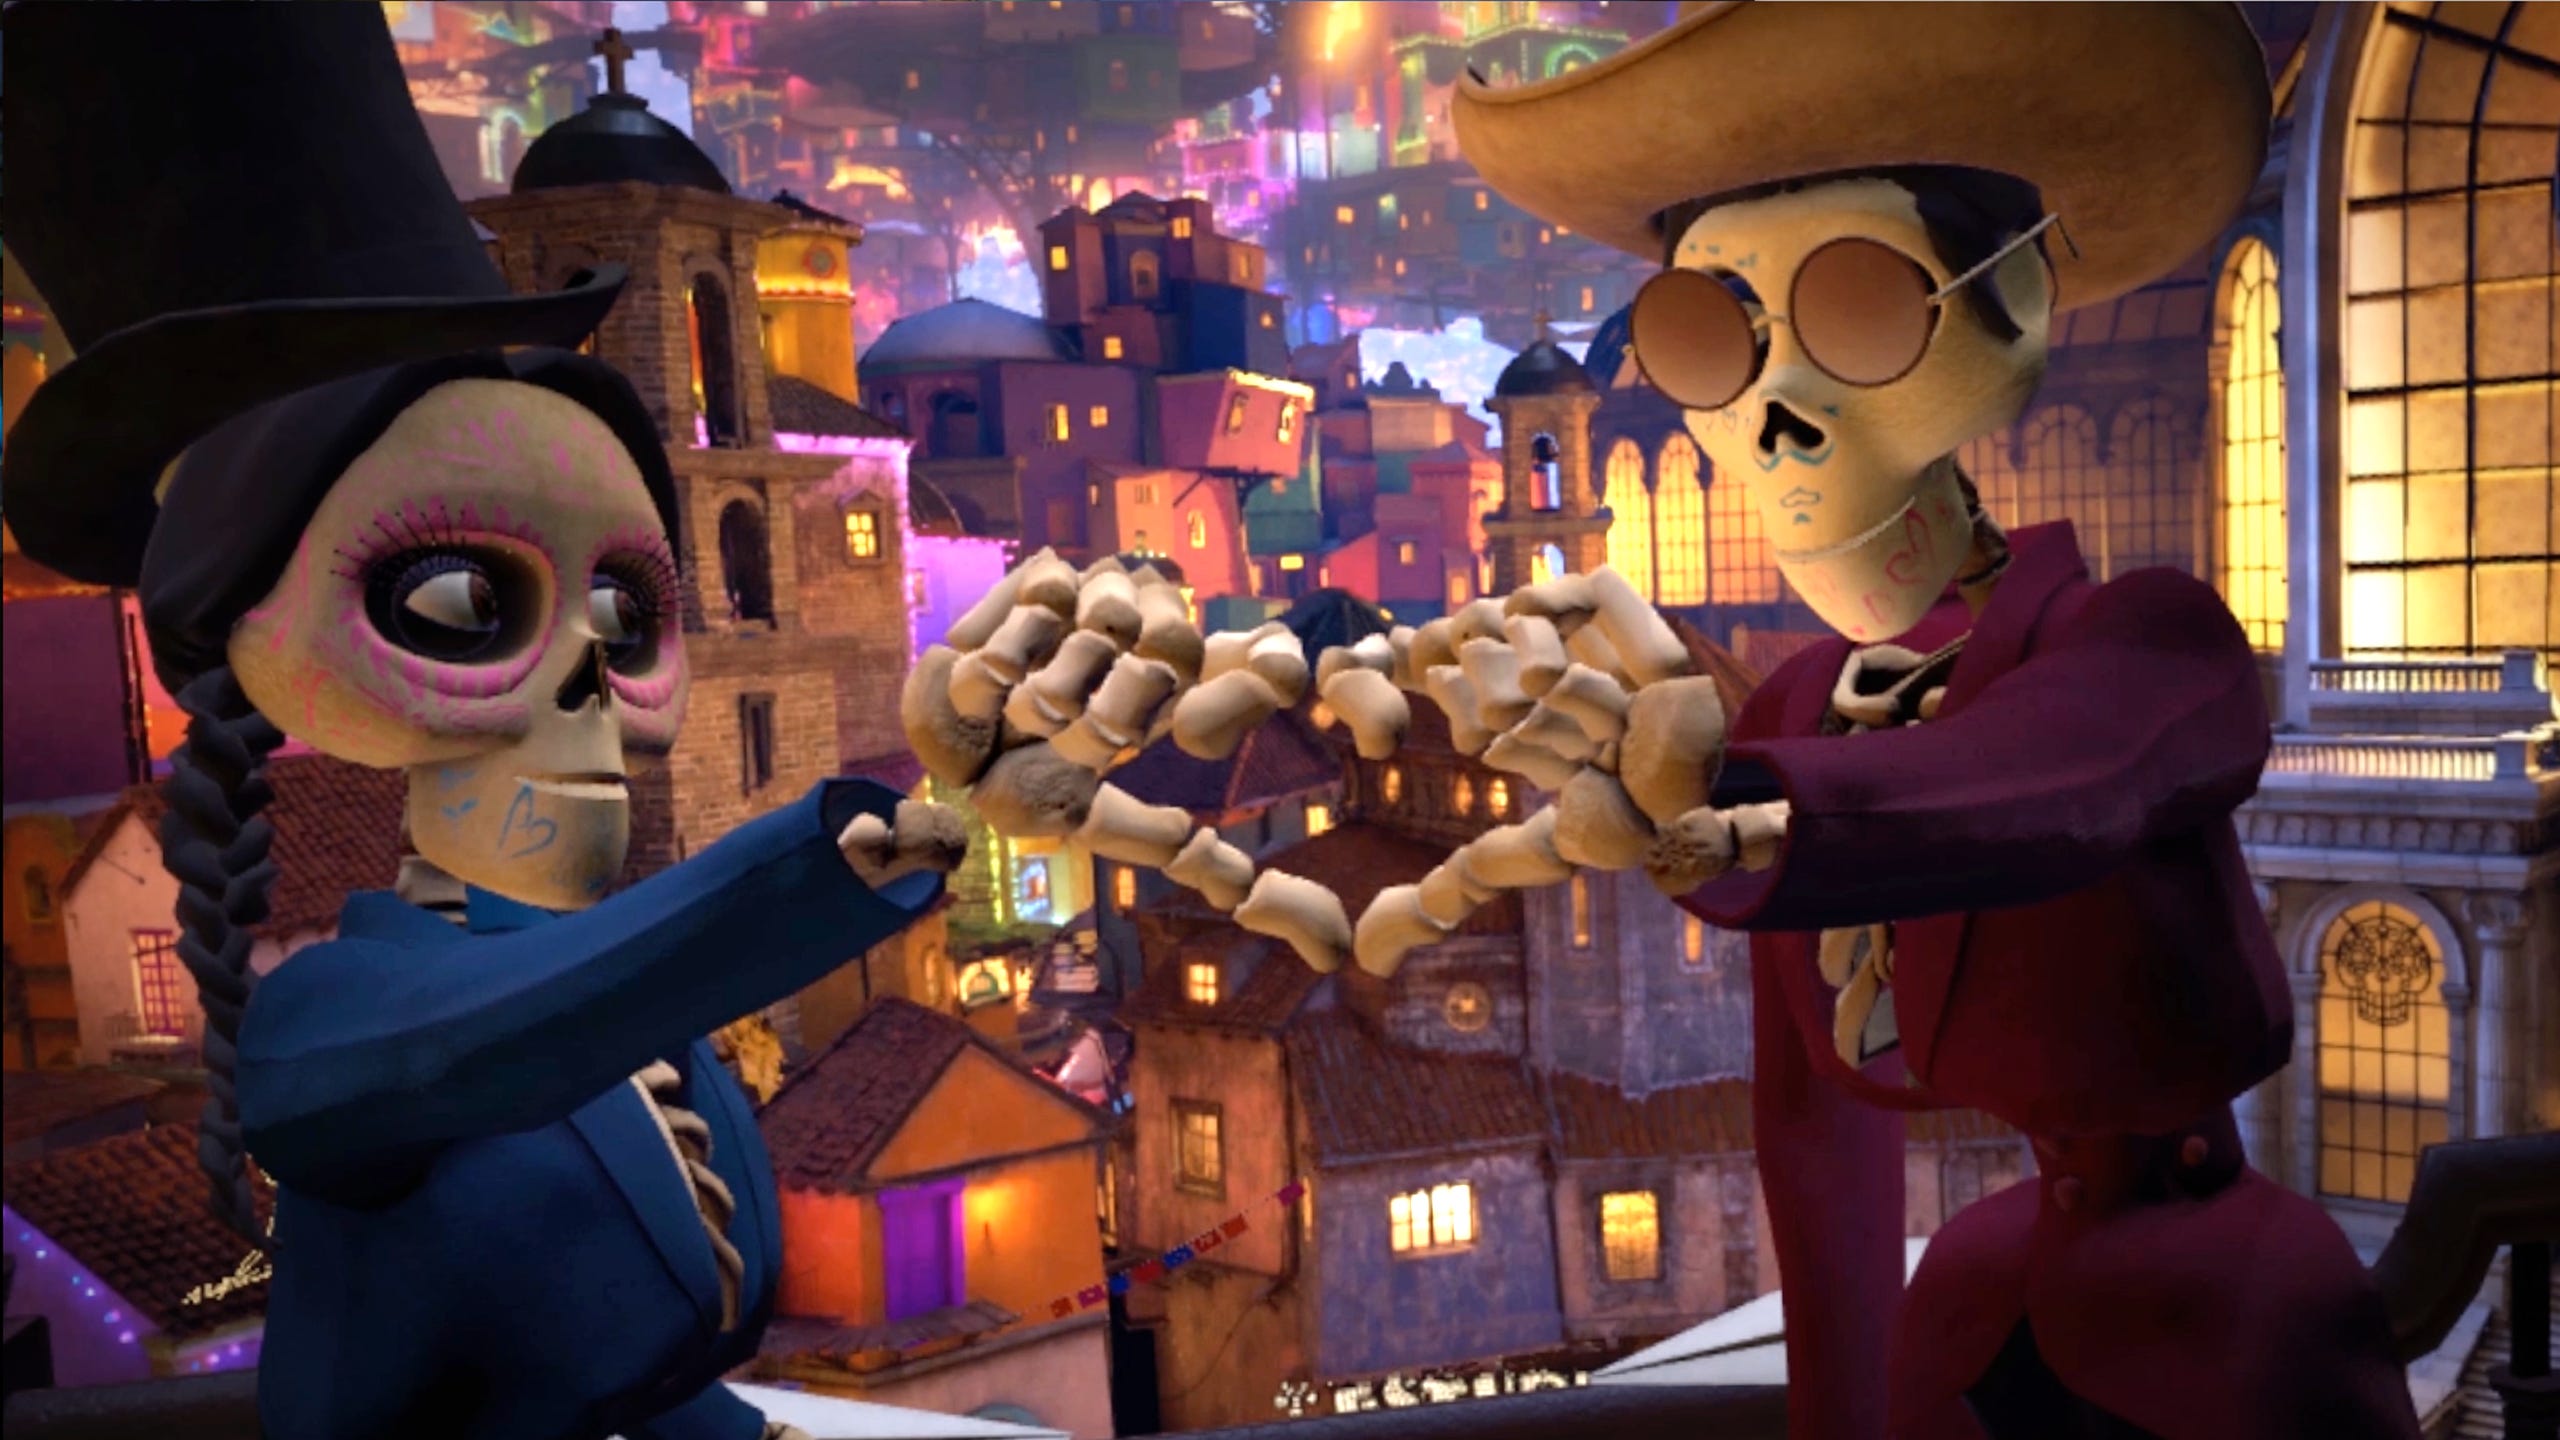 Pixar uses VR to bring 'Coco' and Land of the Dead to life - CNET